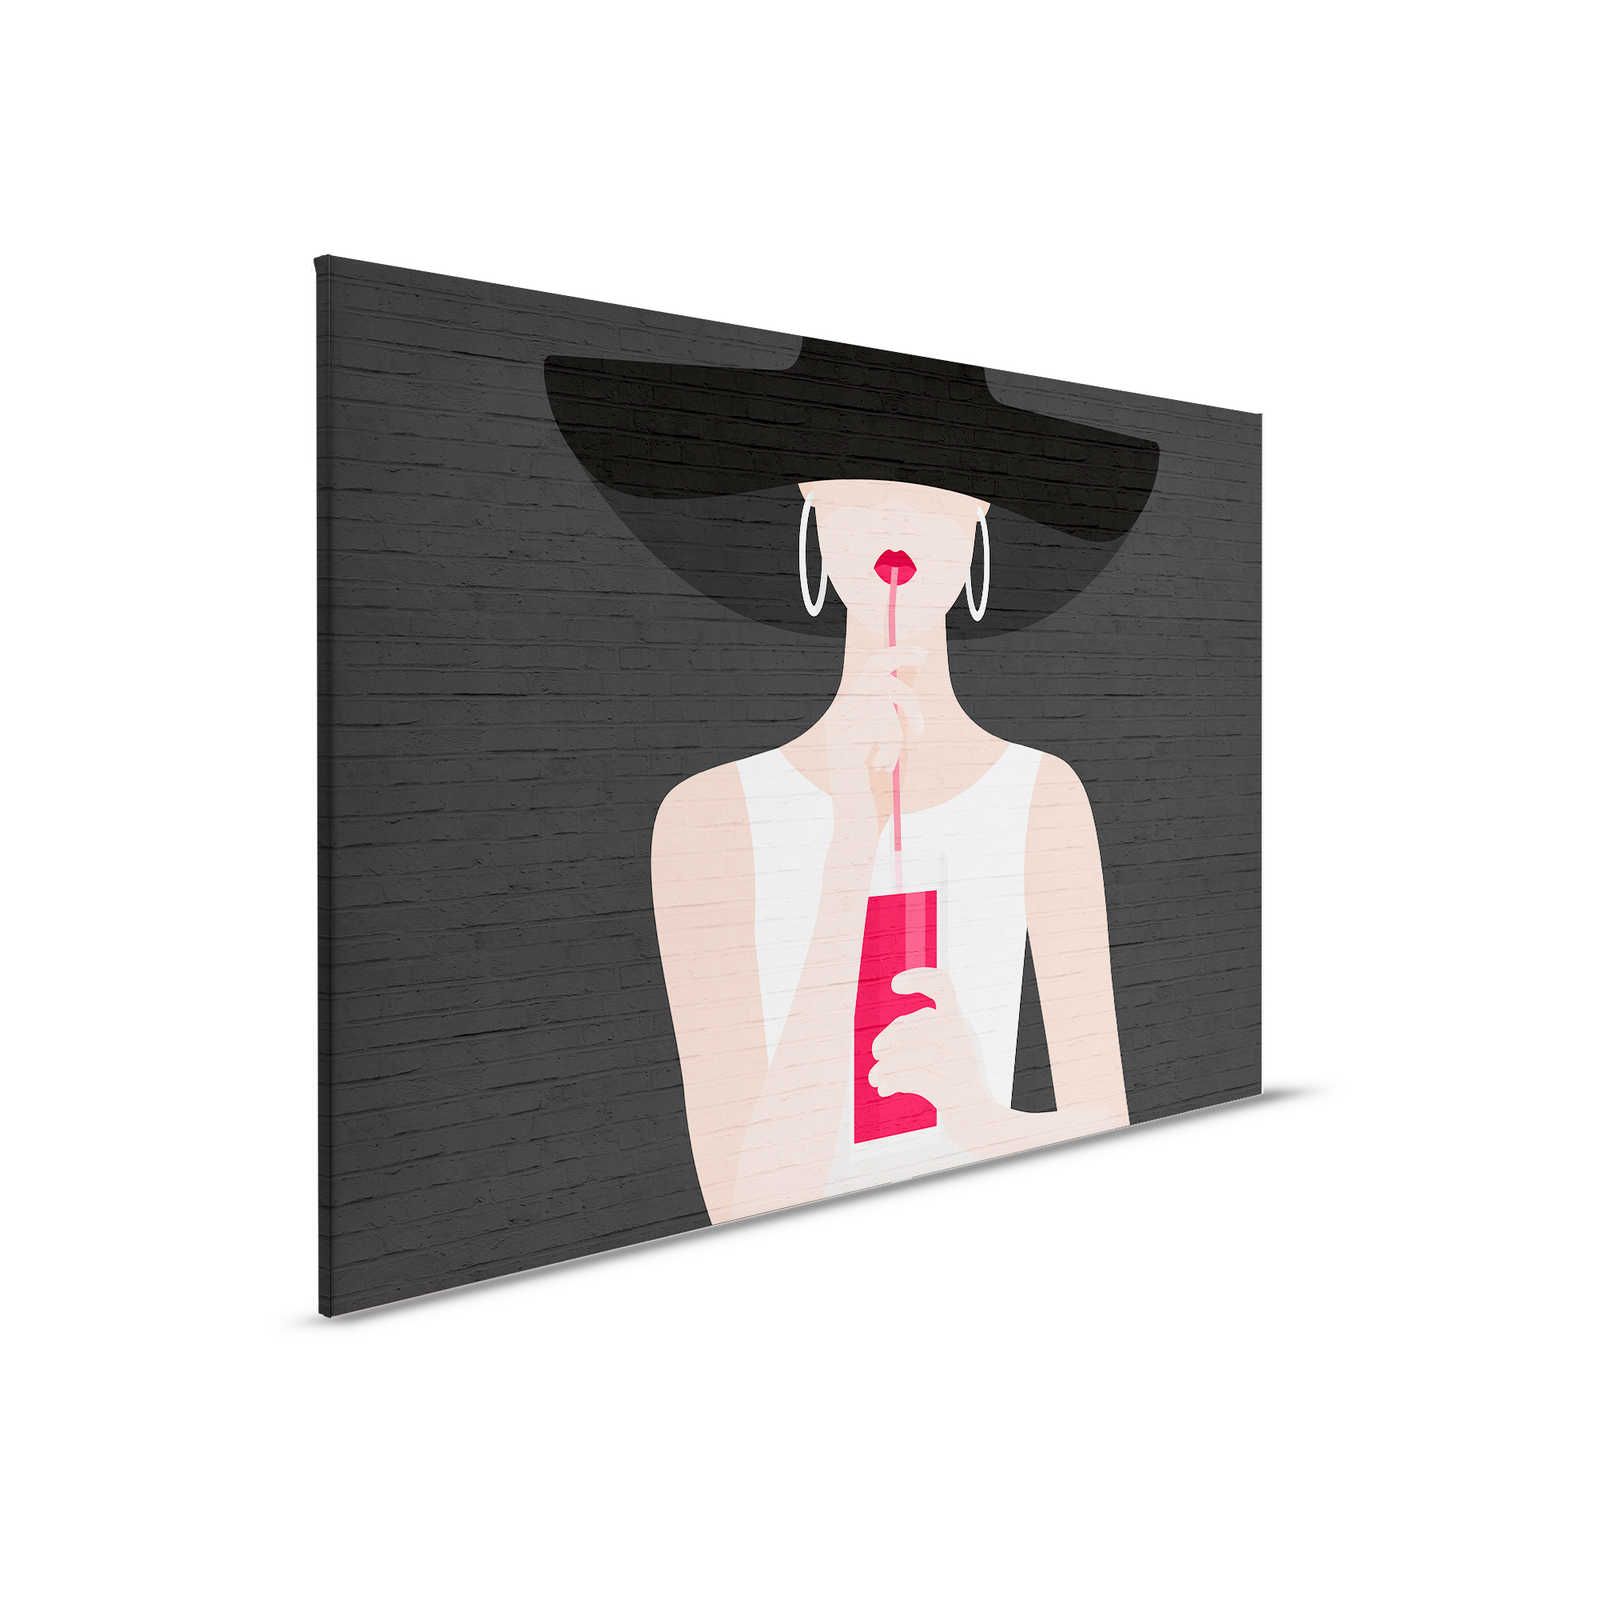         Black Canvas painting Woman with Cocktail & Masonry - 0.90 m x 0.60 m
    